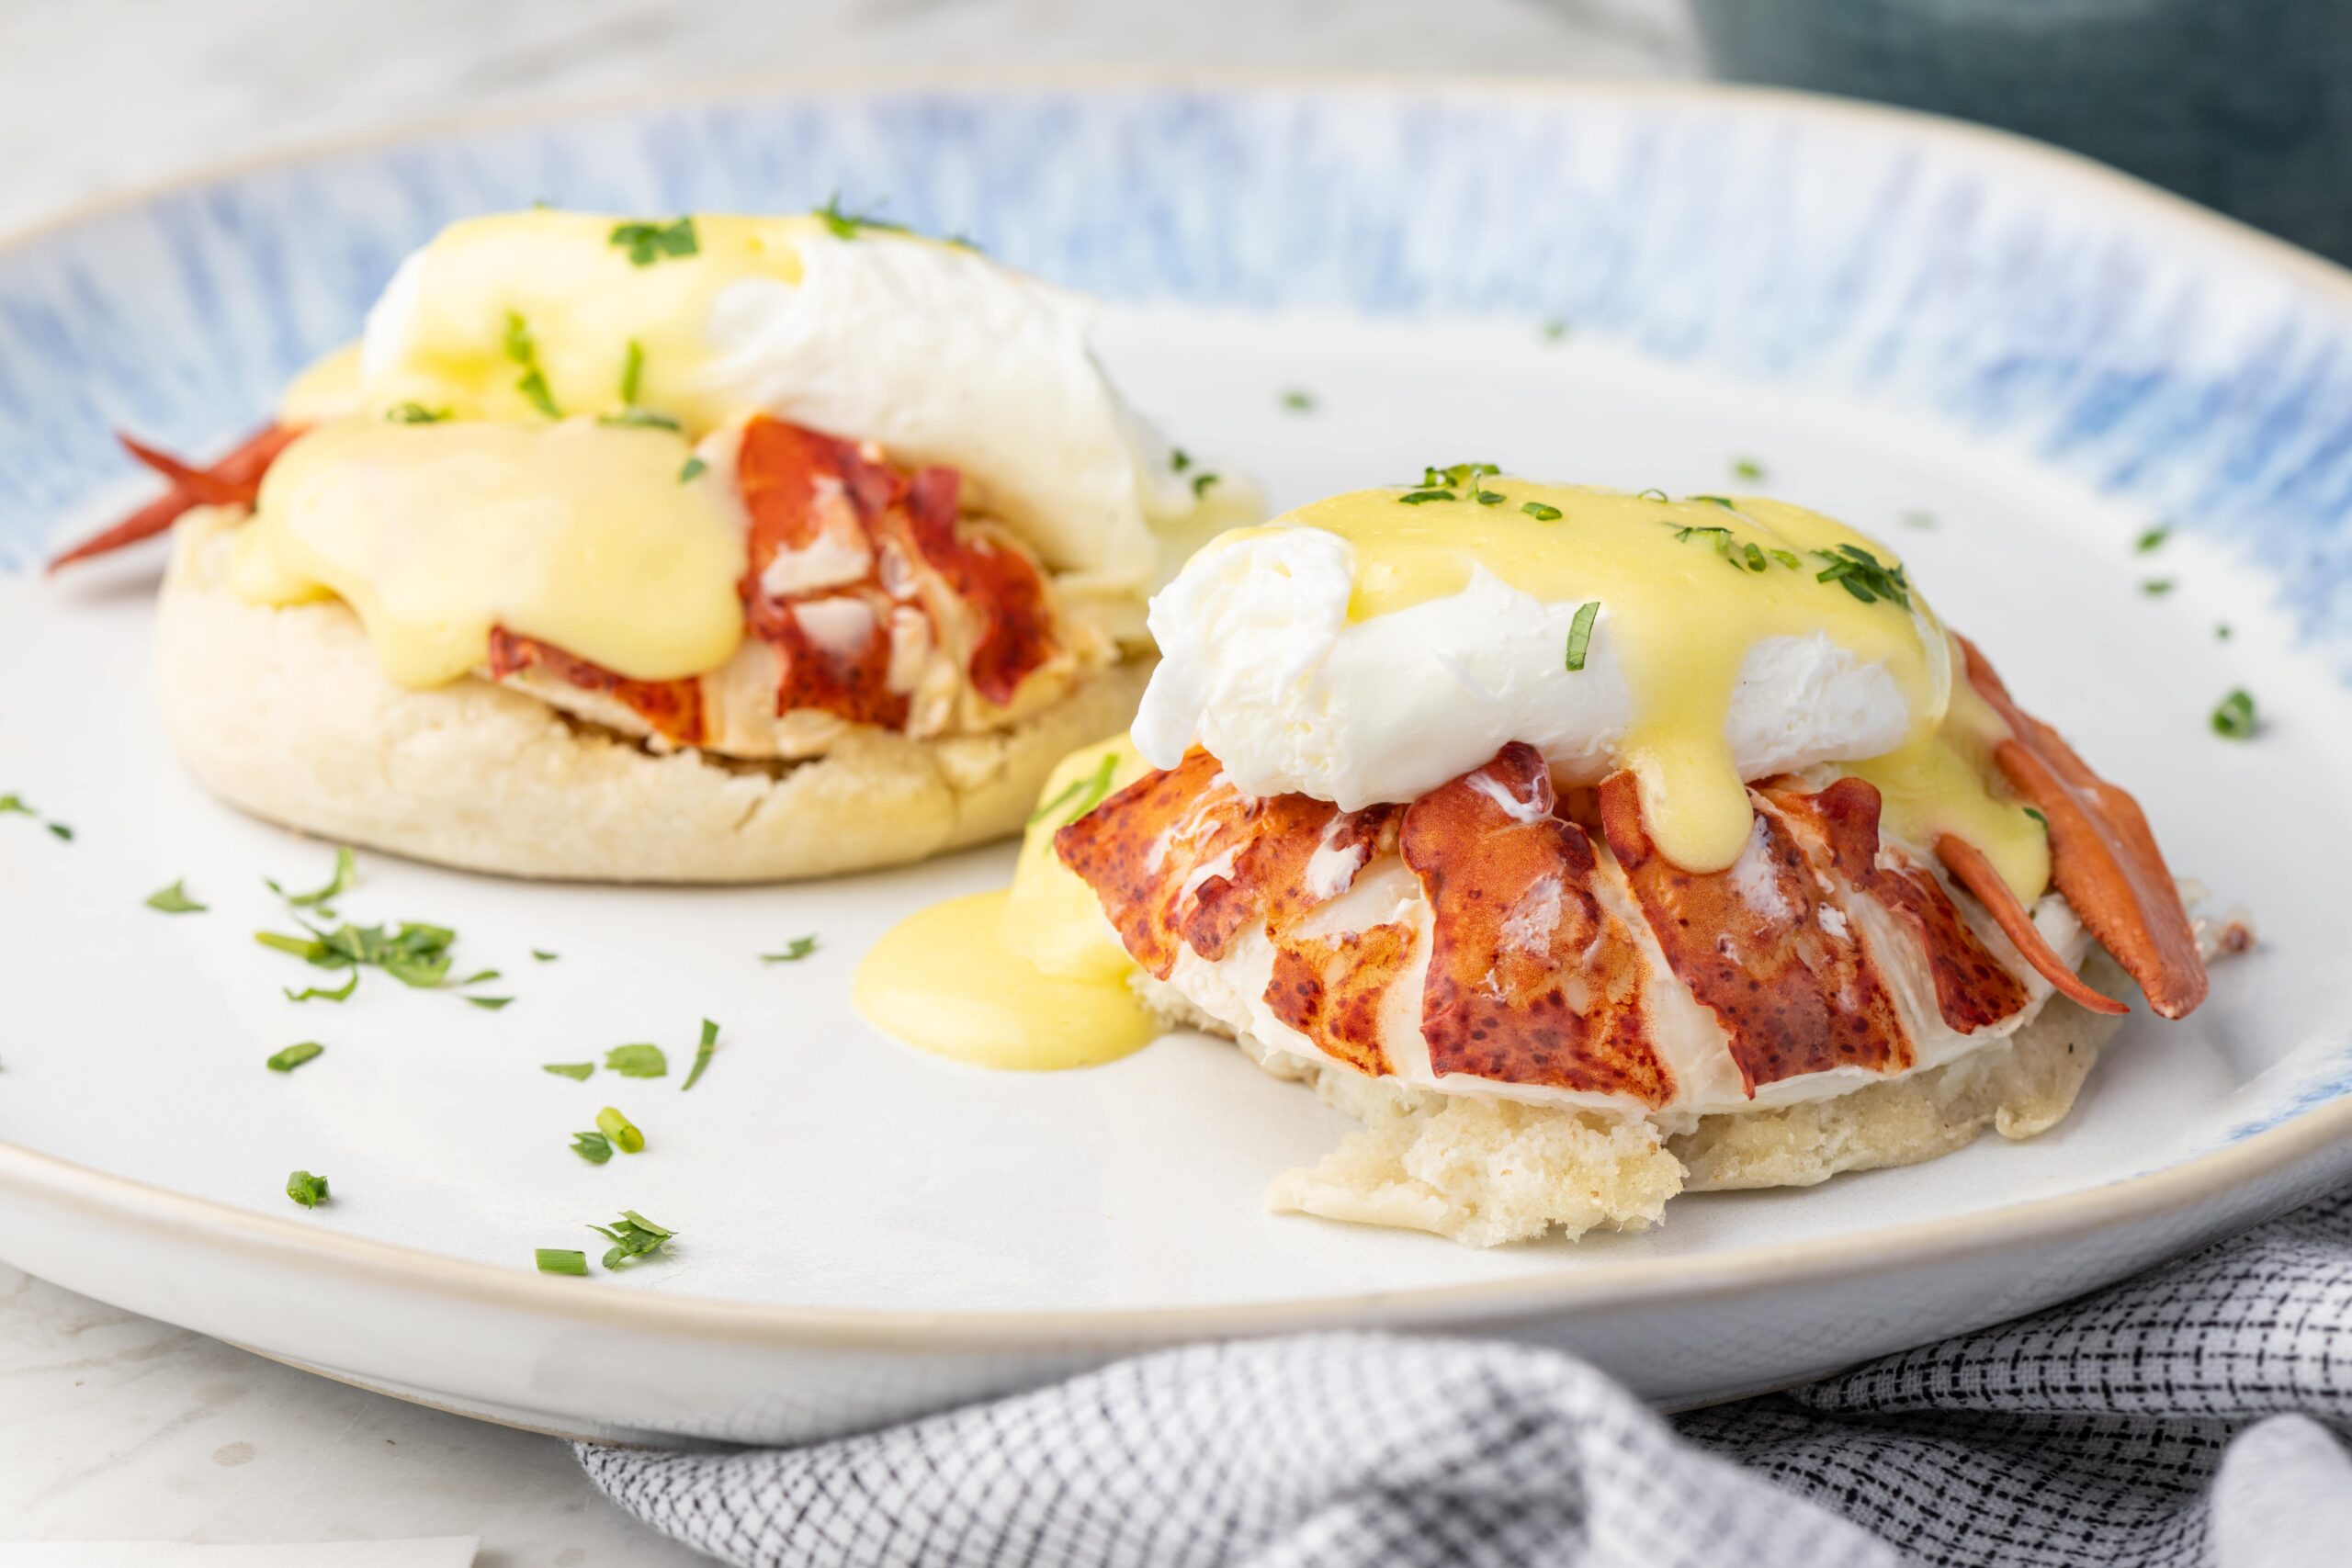 An image of Lobster Benedict from 1 Pico at Shutters On the Beach.